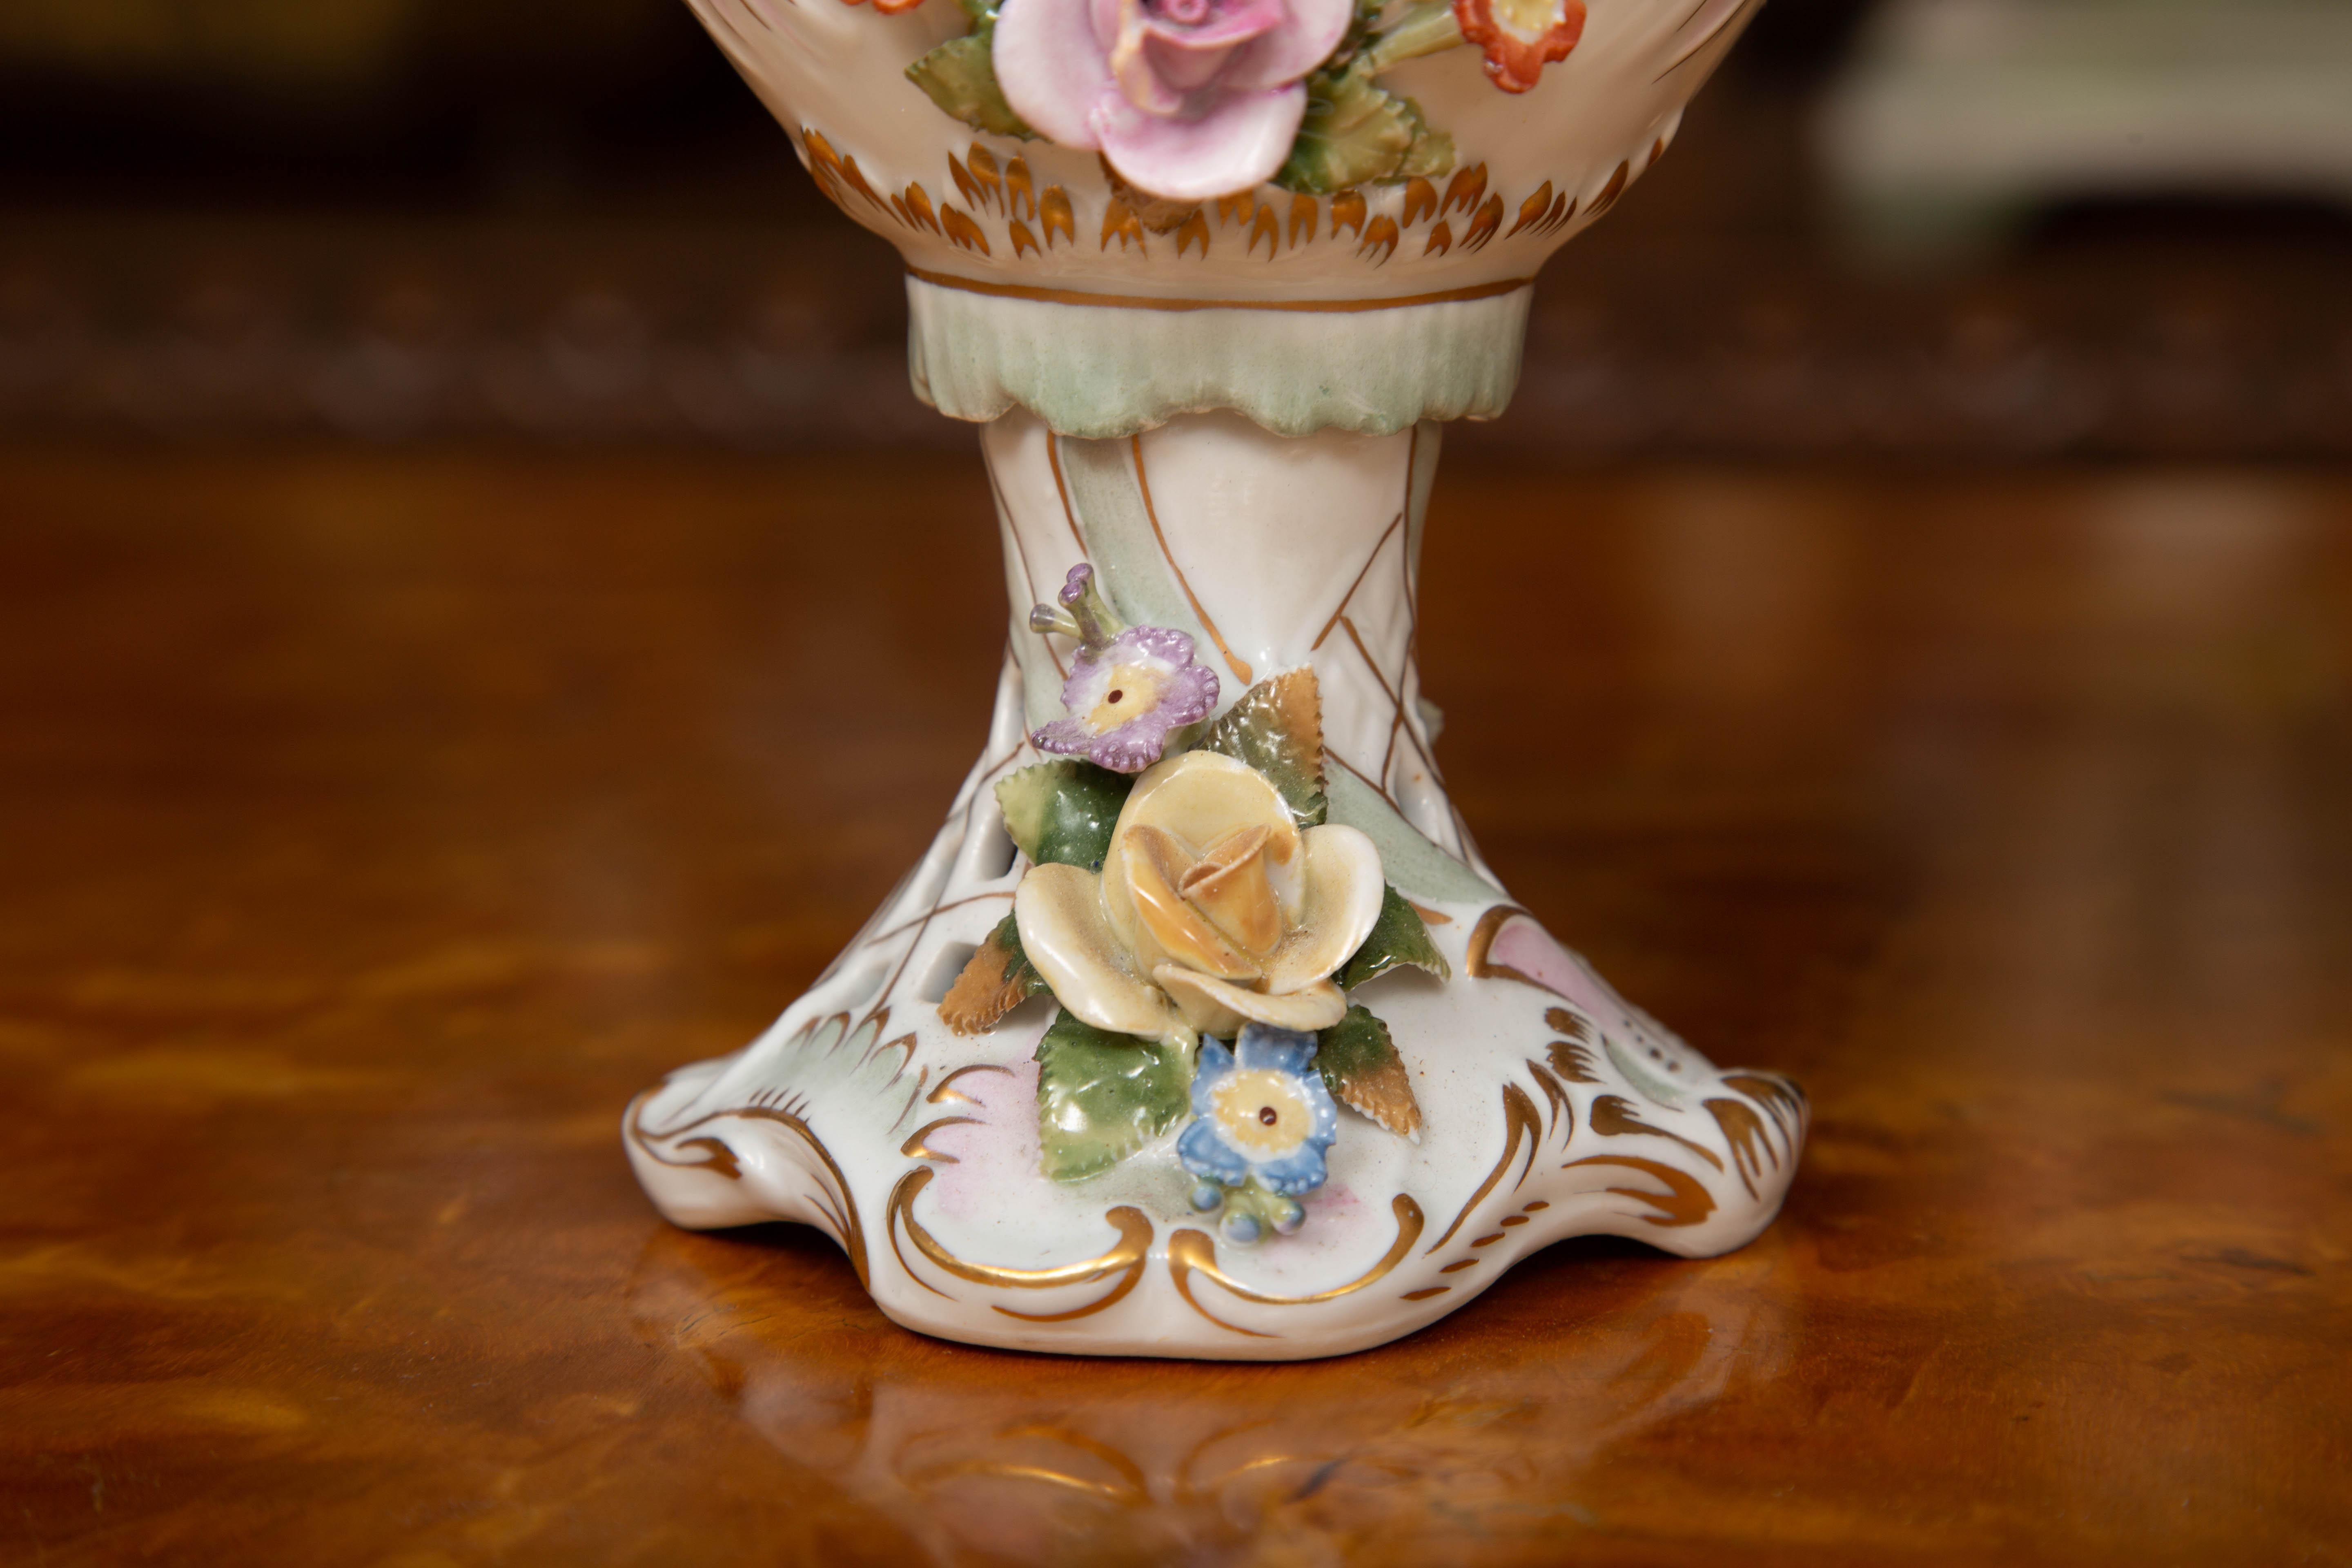 This is an elegant pair of German Dresden style potpourri vases, delicately painted overall with flowers and enhanced by clusters of porcelain flowers. The vases are lidded with a pierced top capped by a prominent finial of a cluster of porcelain